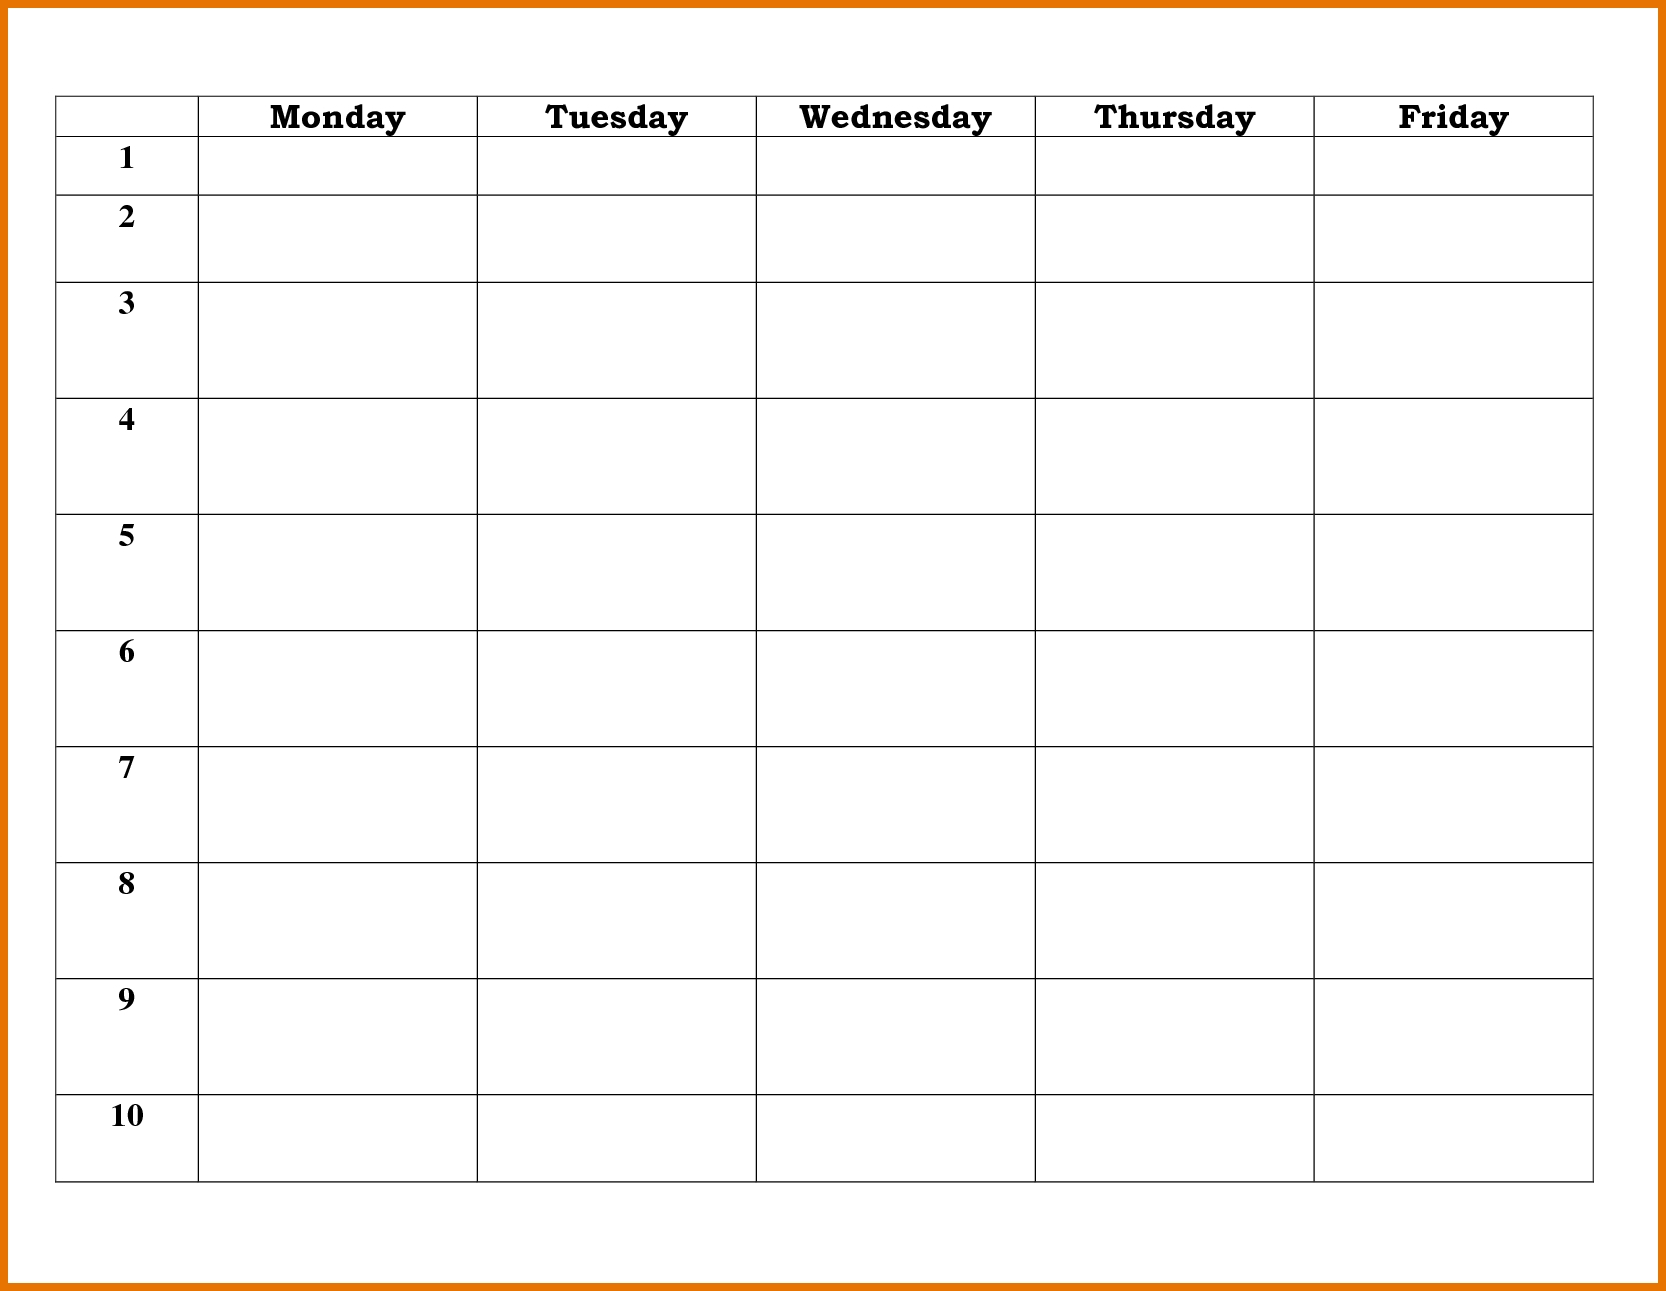 5 Day Weekly Timetable Blank 6 Periods | Calendar Template with Blank 5 Week Calendar